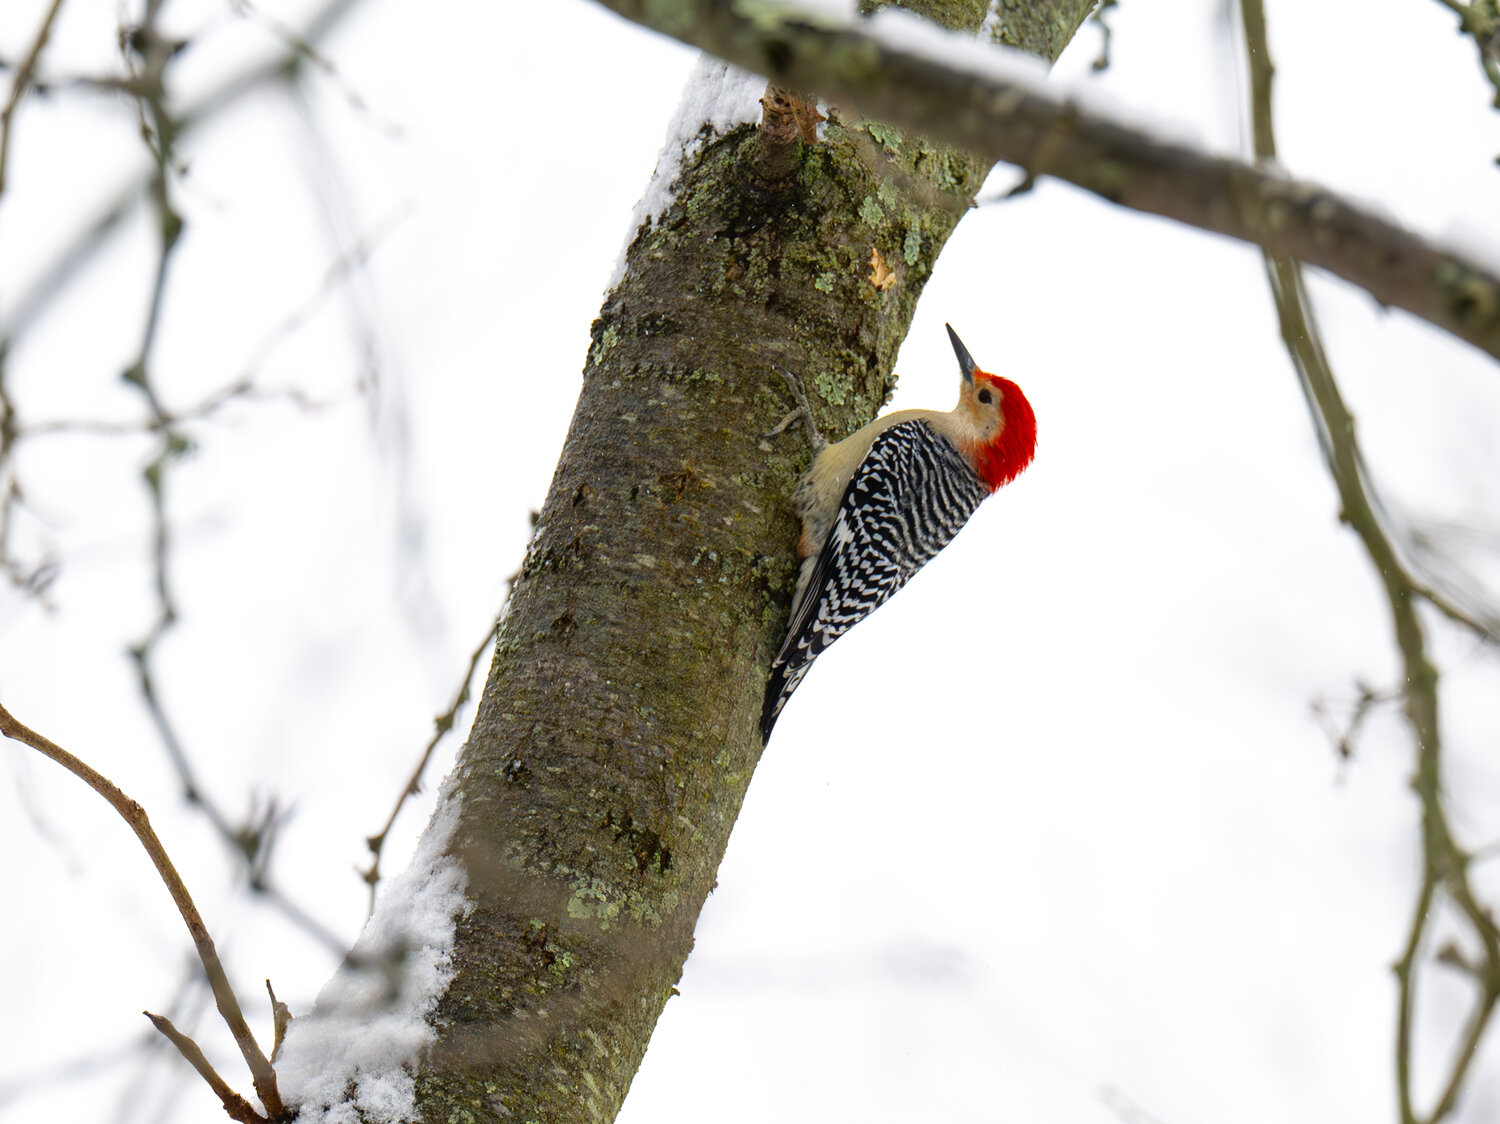 A red-bellied woodpecker chips away at a tree Tuesday in Plumstead Township.